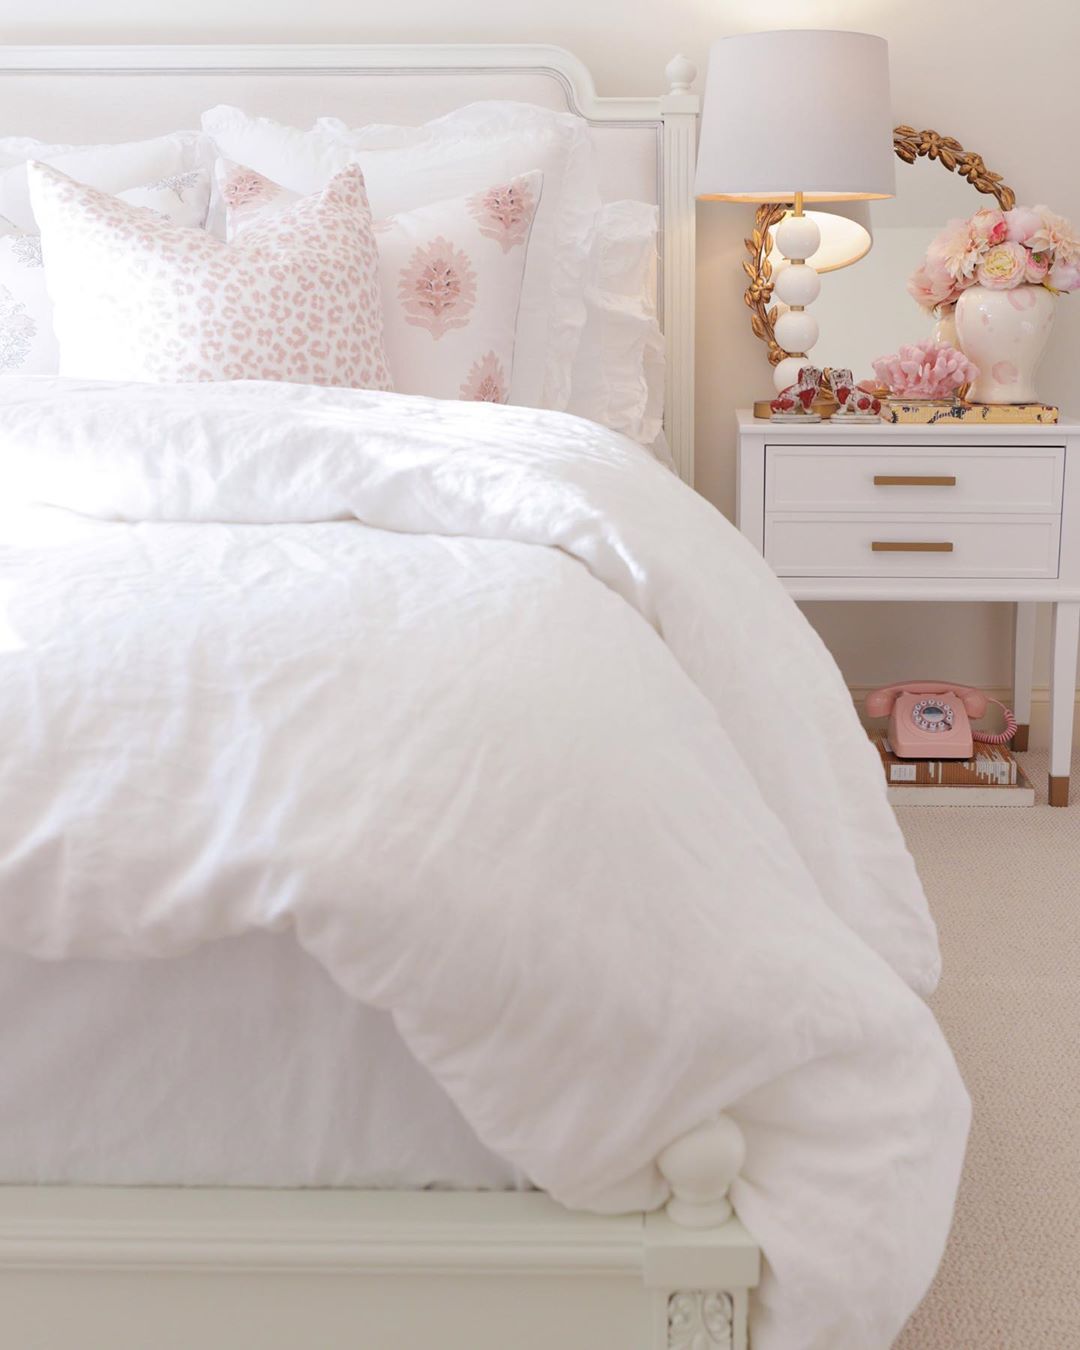 Feminine Bedroom with Fluffy Linens and Gold Accents via @sugarcolorhouse